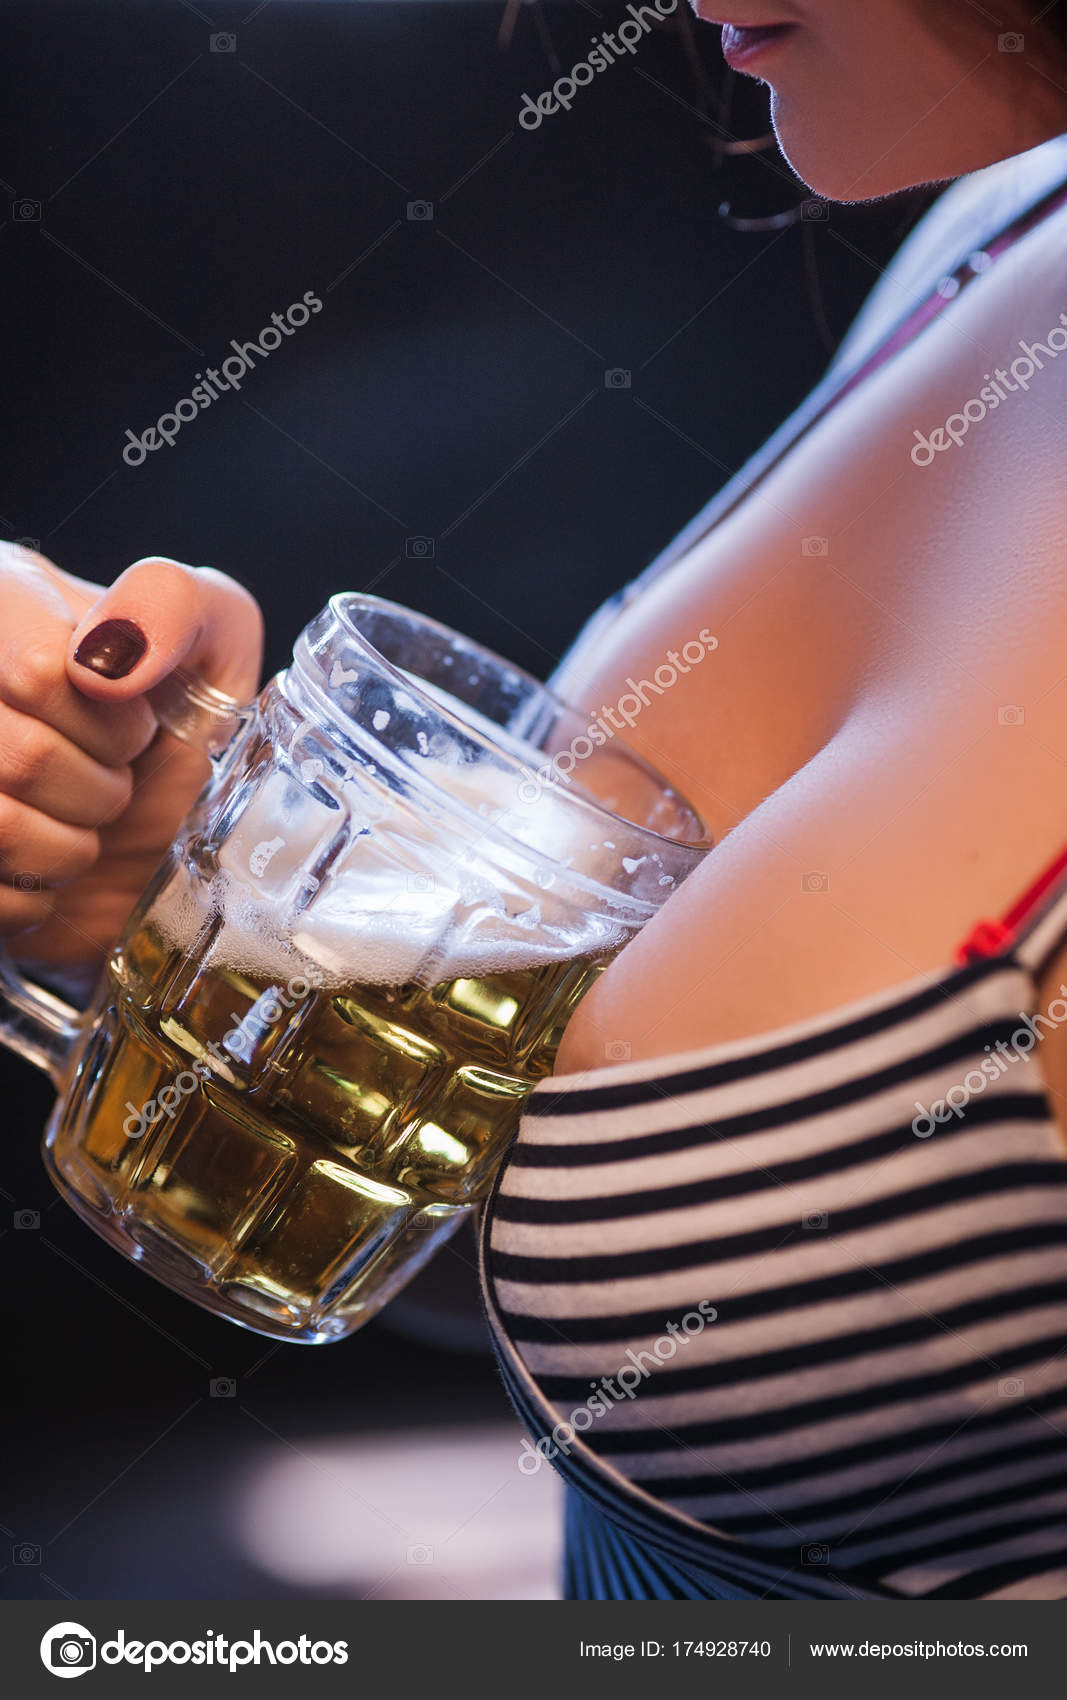 [Jeu] Suite d'images !  - Page 31 Depositphotos_174928740-stock-photo-big-breasts-woman-beer-glass